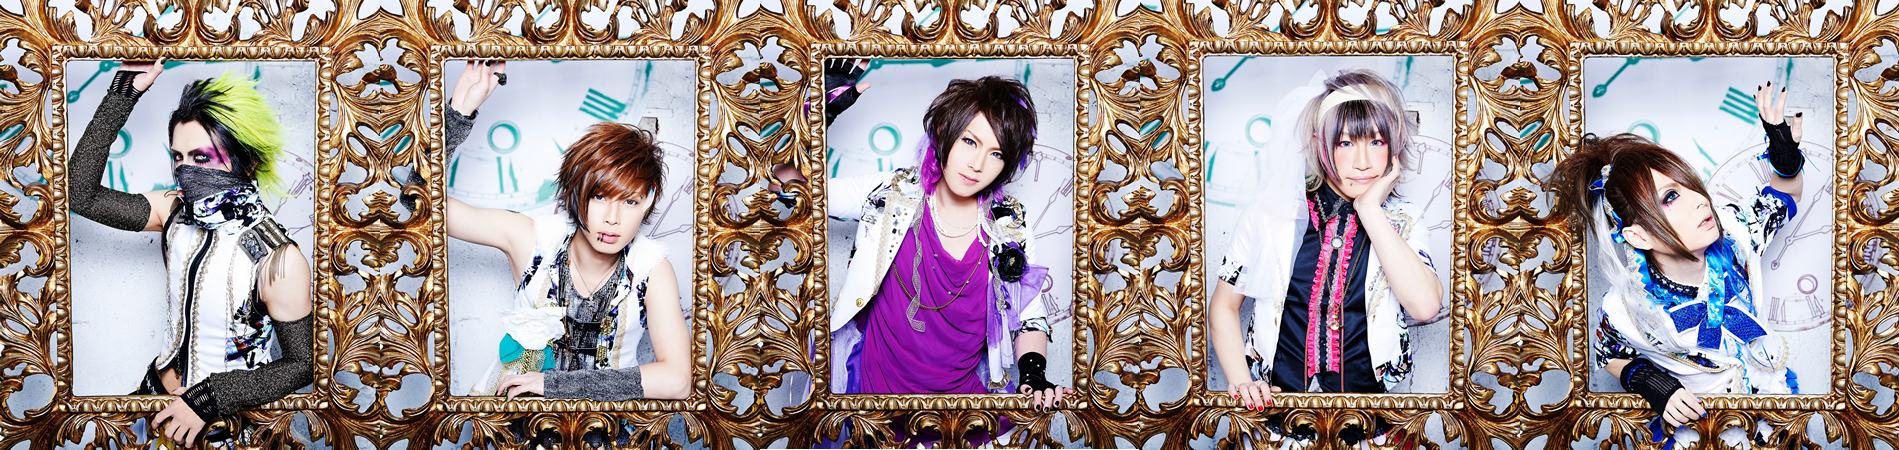 ＜Source：シリアル⇔NUMBER Official Website＞